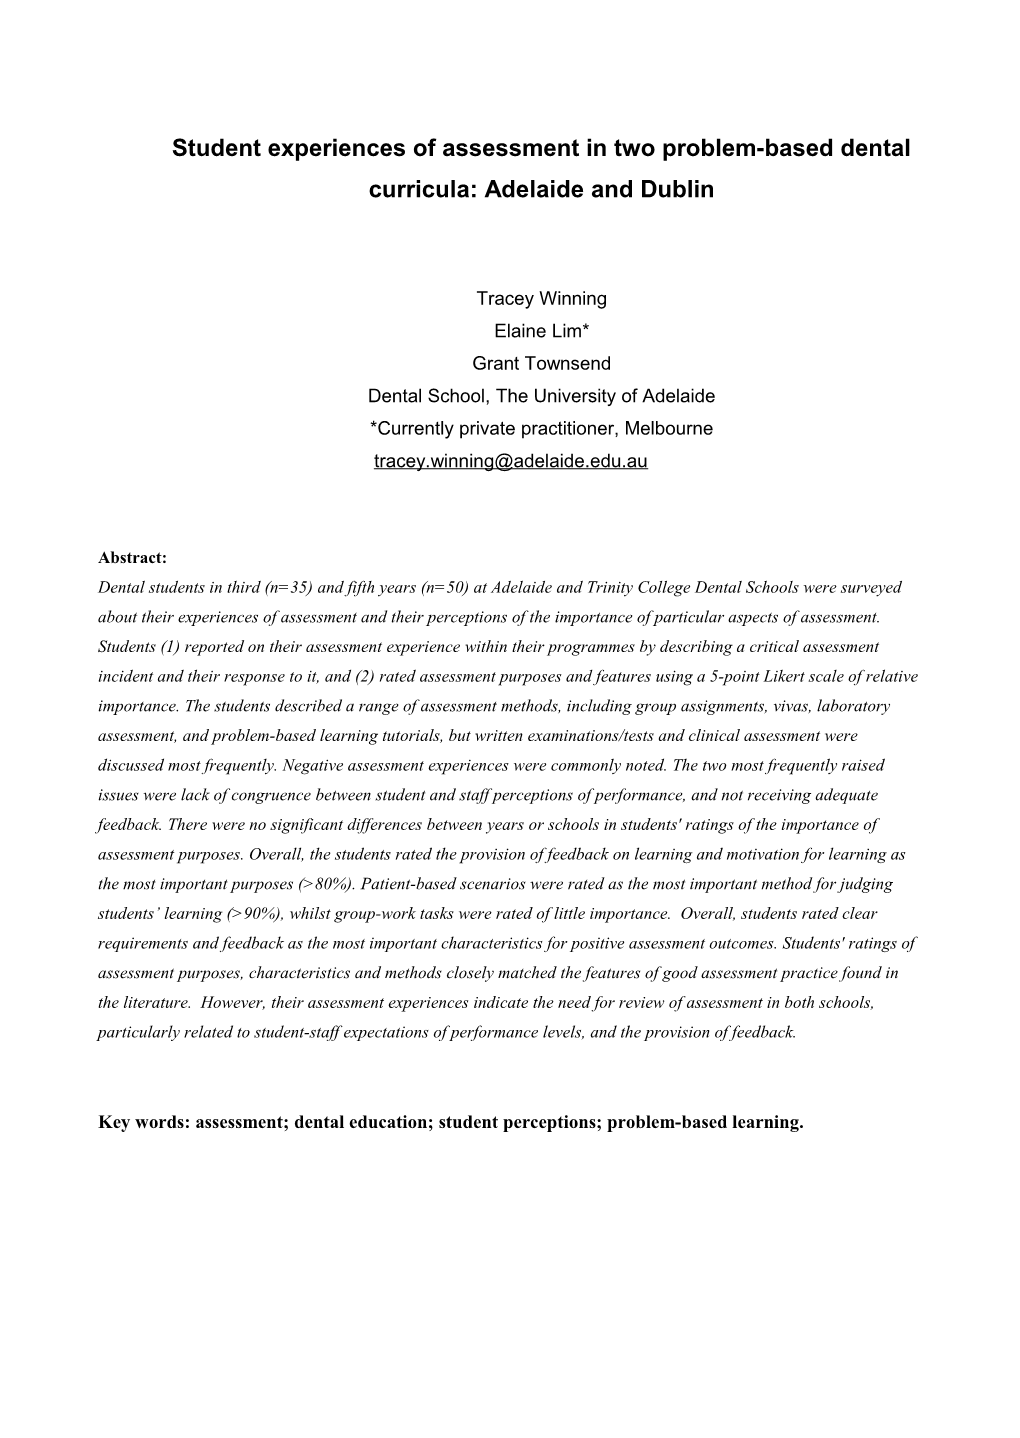 Student Experiences of Assessment in Two Problem-Based Dental Curricula: Adelaide and Dublin